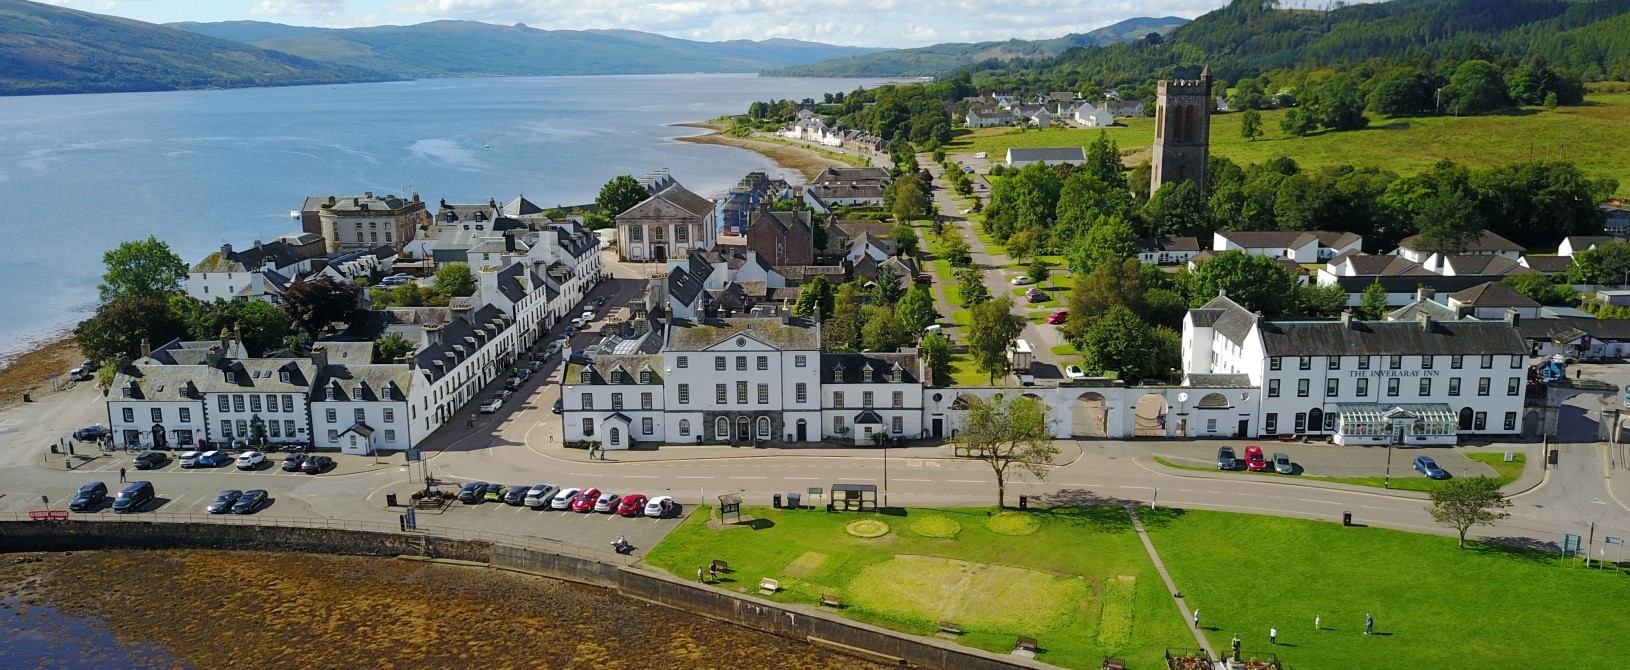 A visit to this charming Georgian town called Inveraray